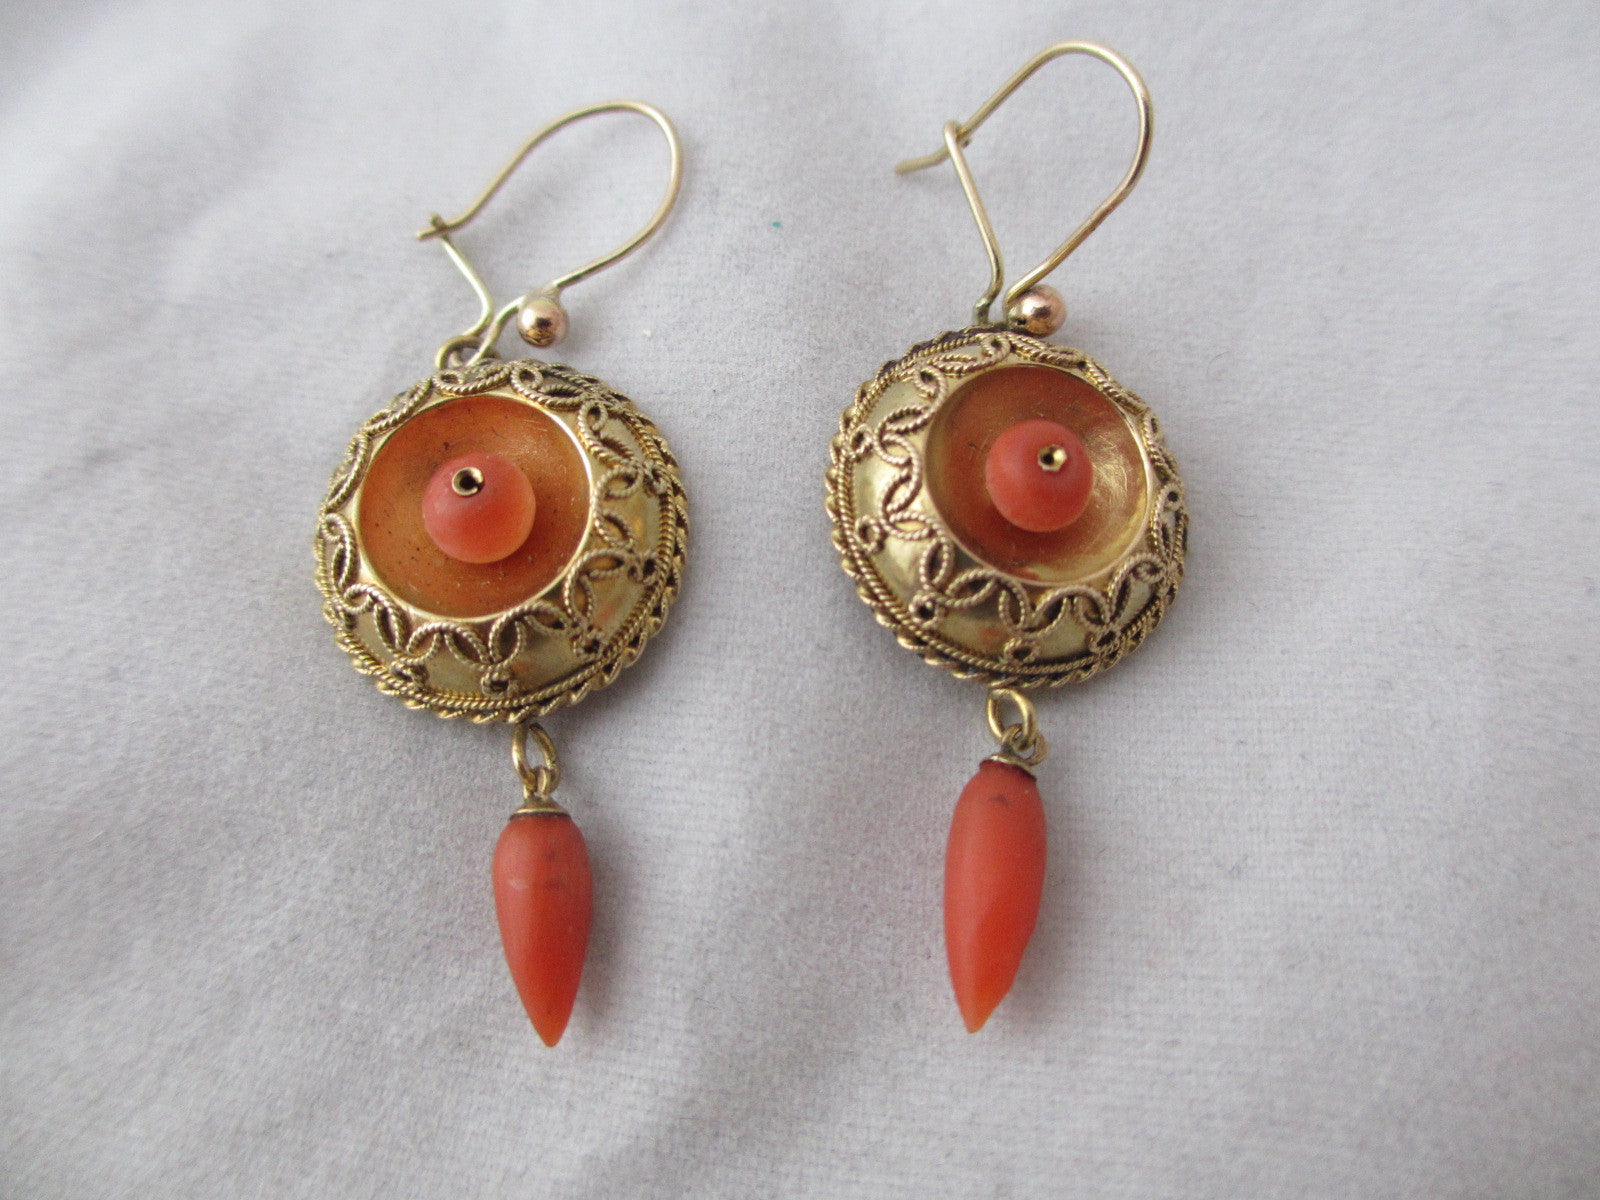 Antique and Vintage Earrings